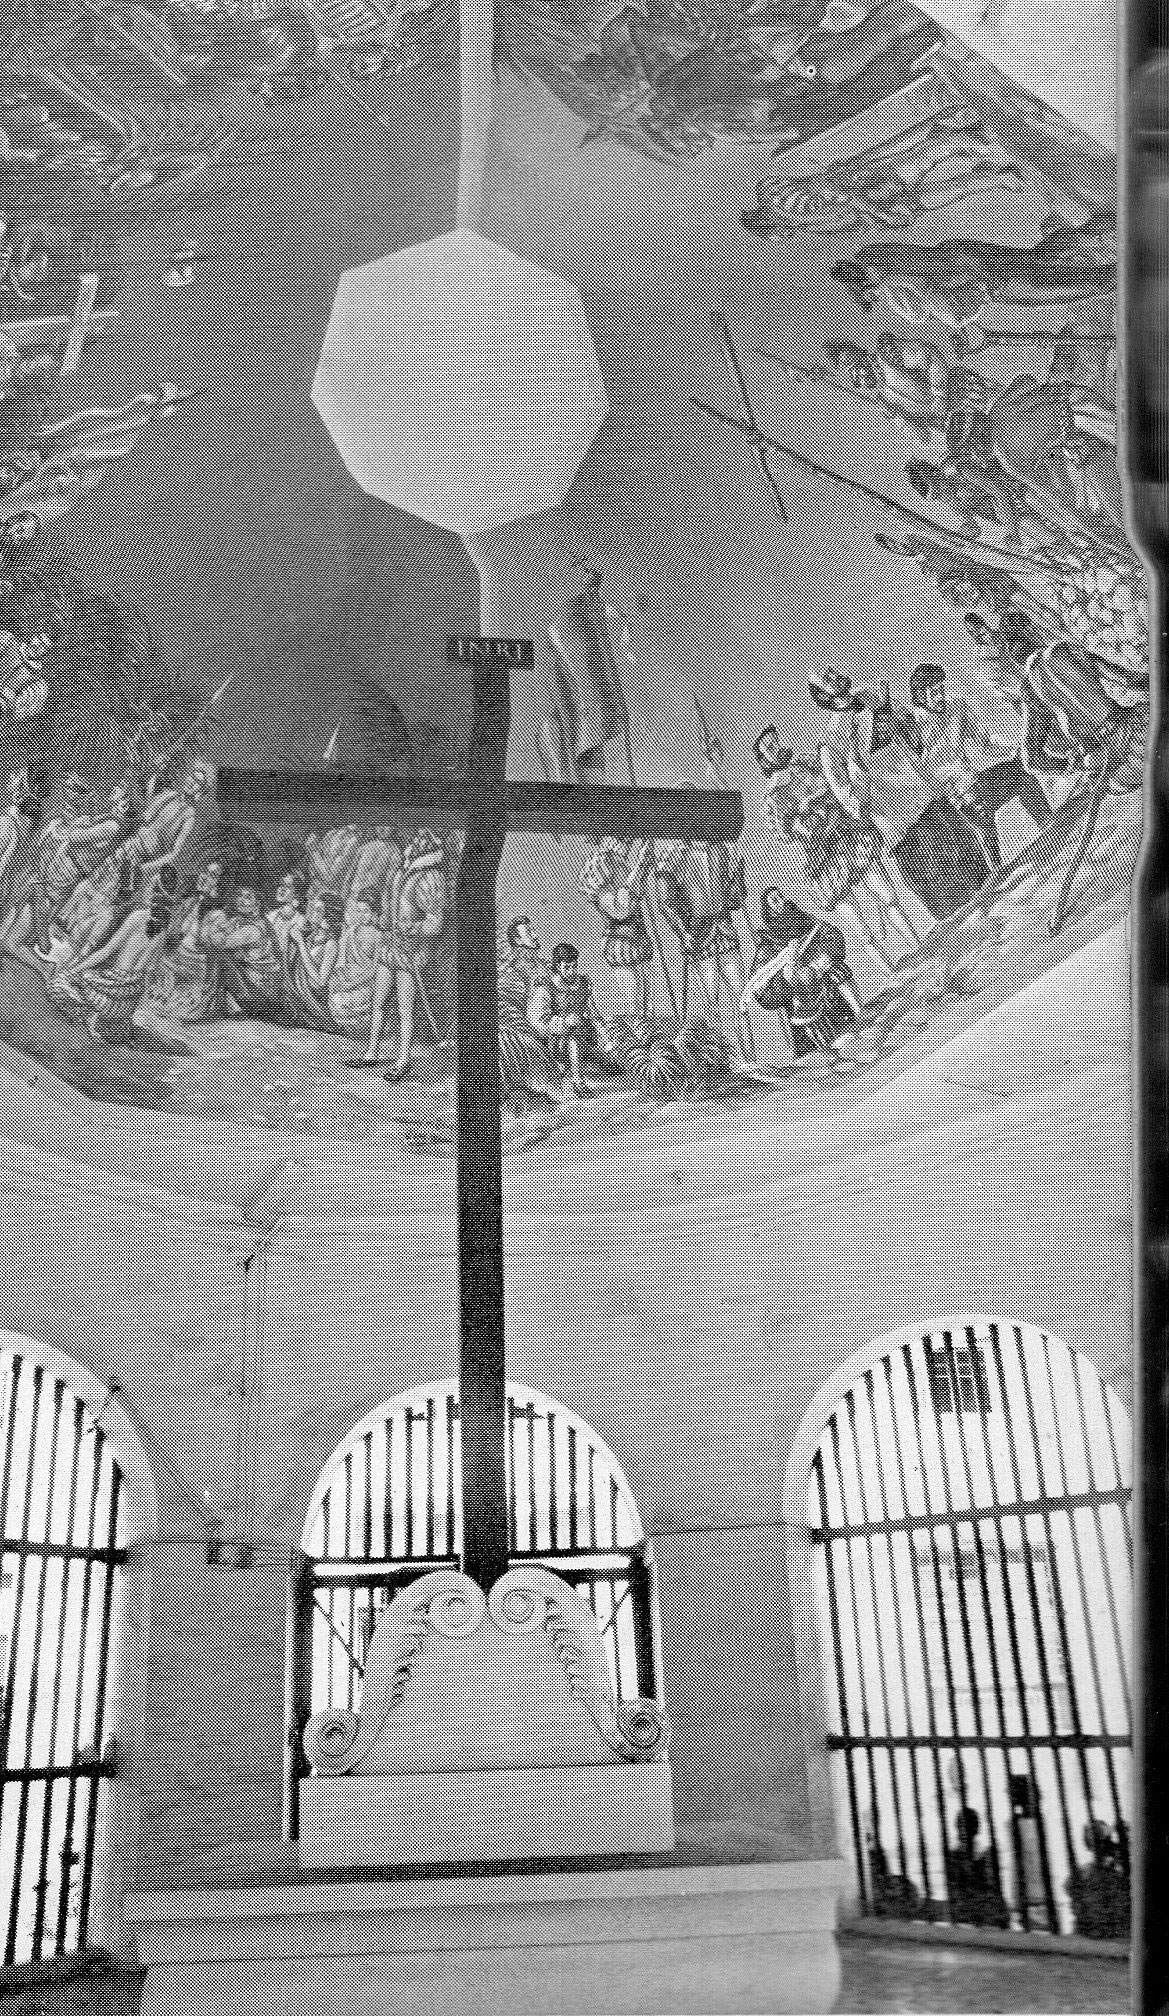 NO TEXT OF CLAIM. This photo after a restoration of the kiosk by the Knights of Columbus several decades ago (we’re still looking into date) does not show at the base of the cross the panel that contains the claims about the original cross and its site.